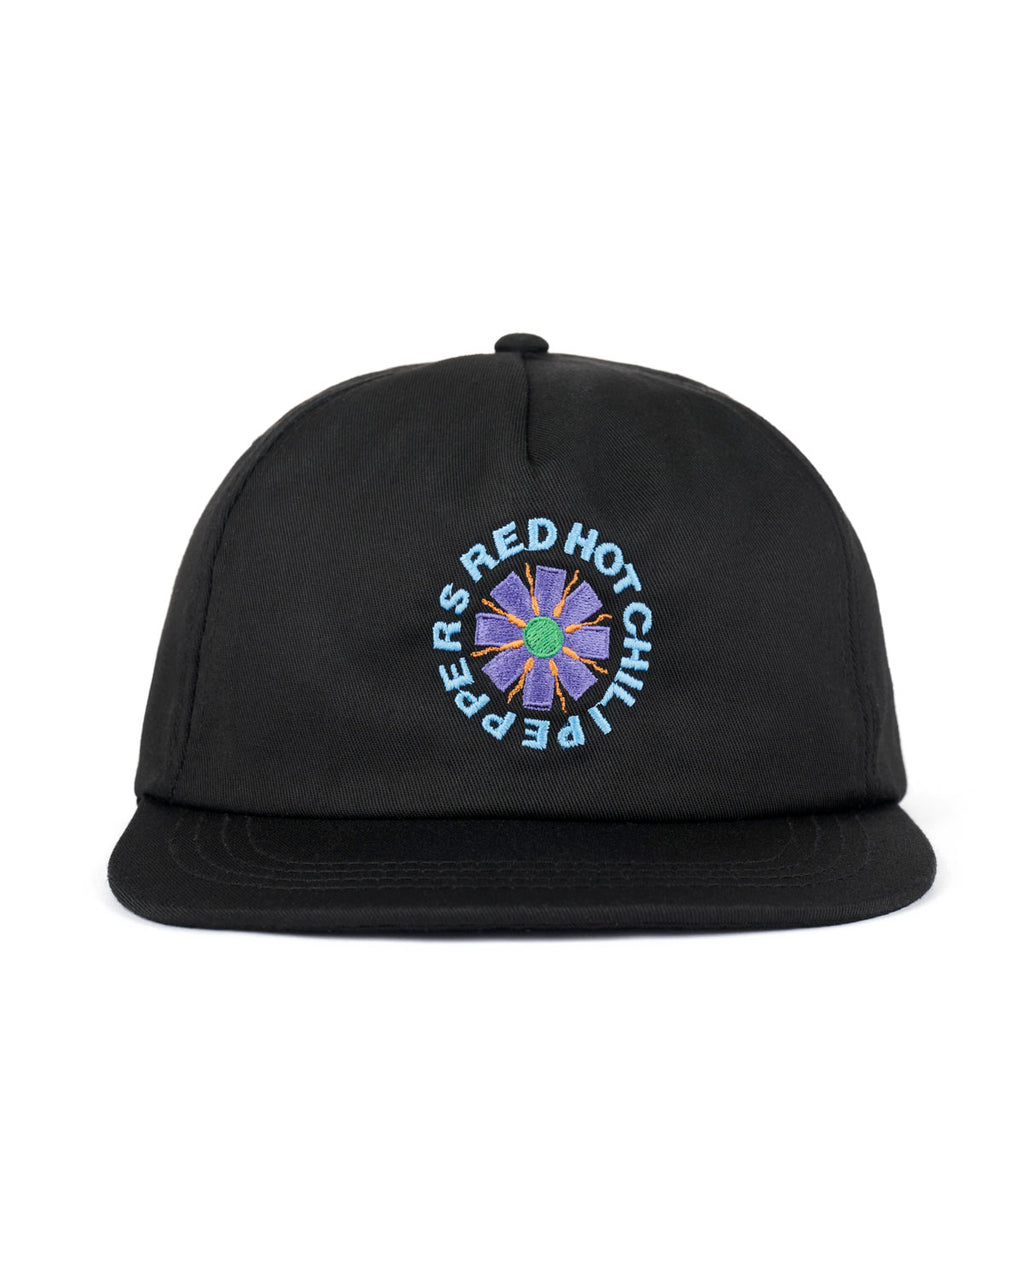 Brain Dead x Red Hot Chili Peppers Hat - Black